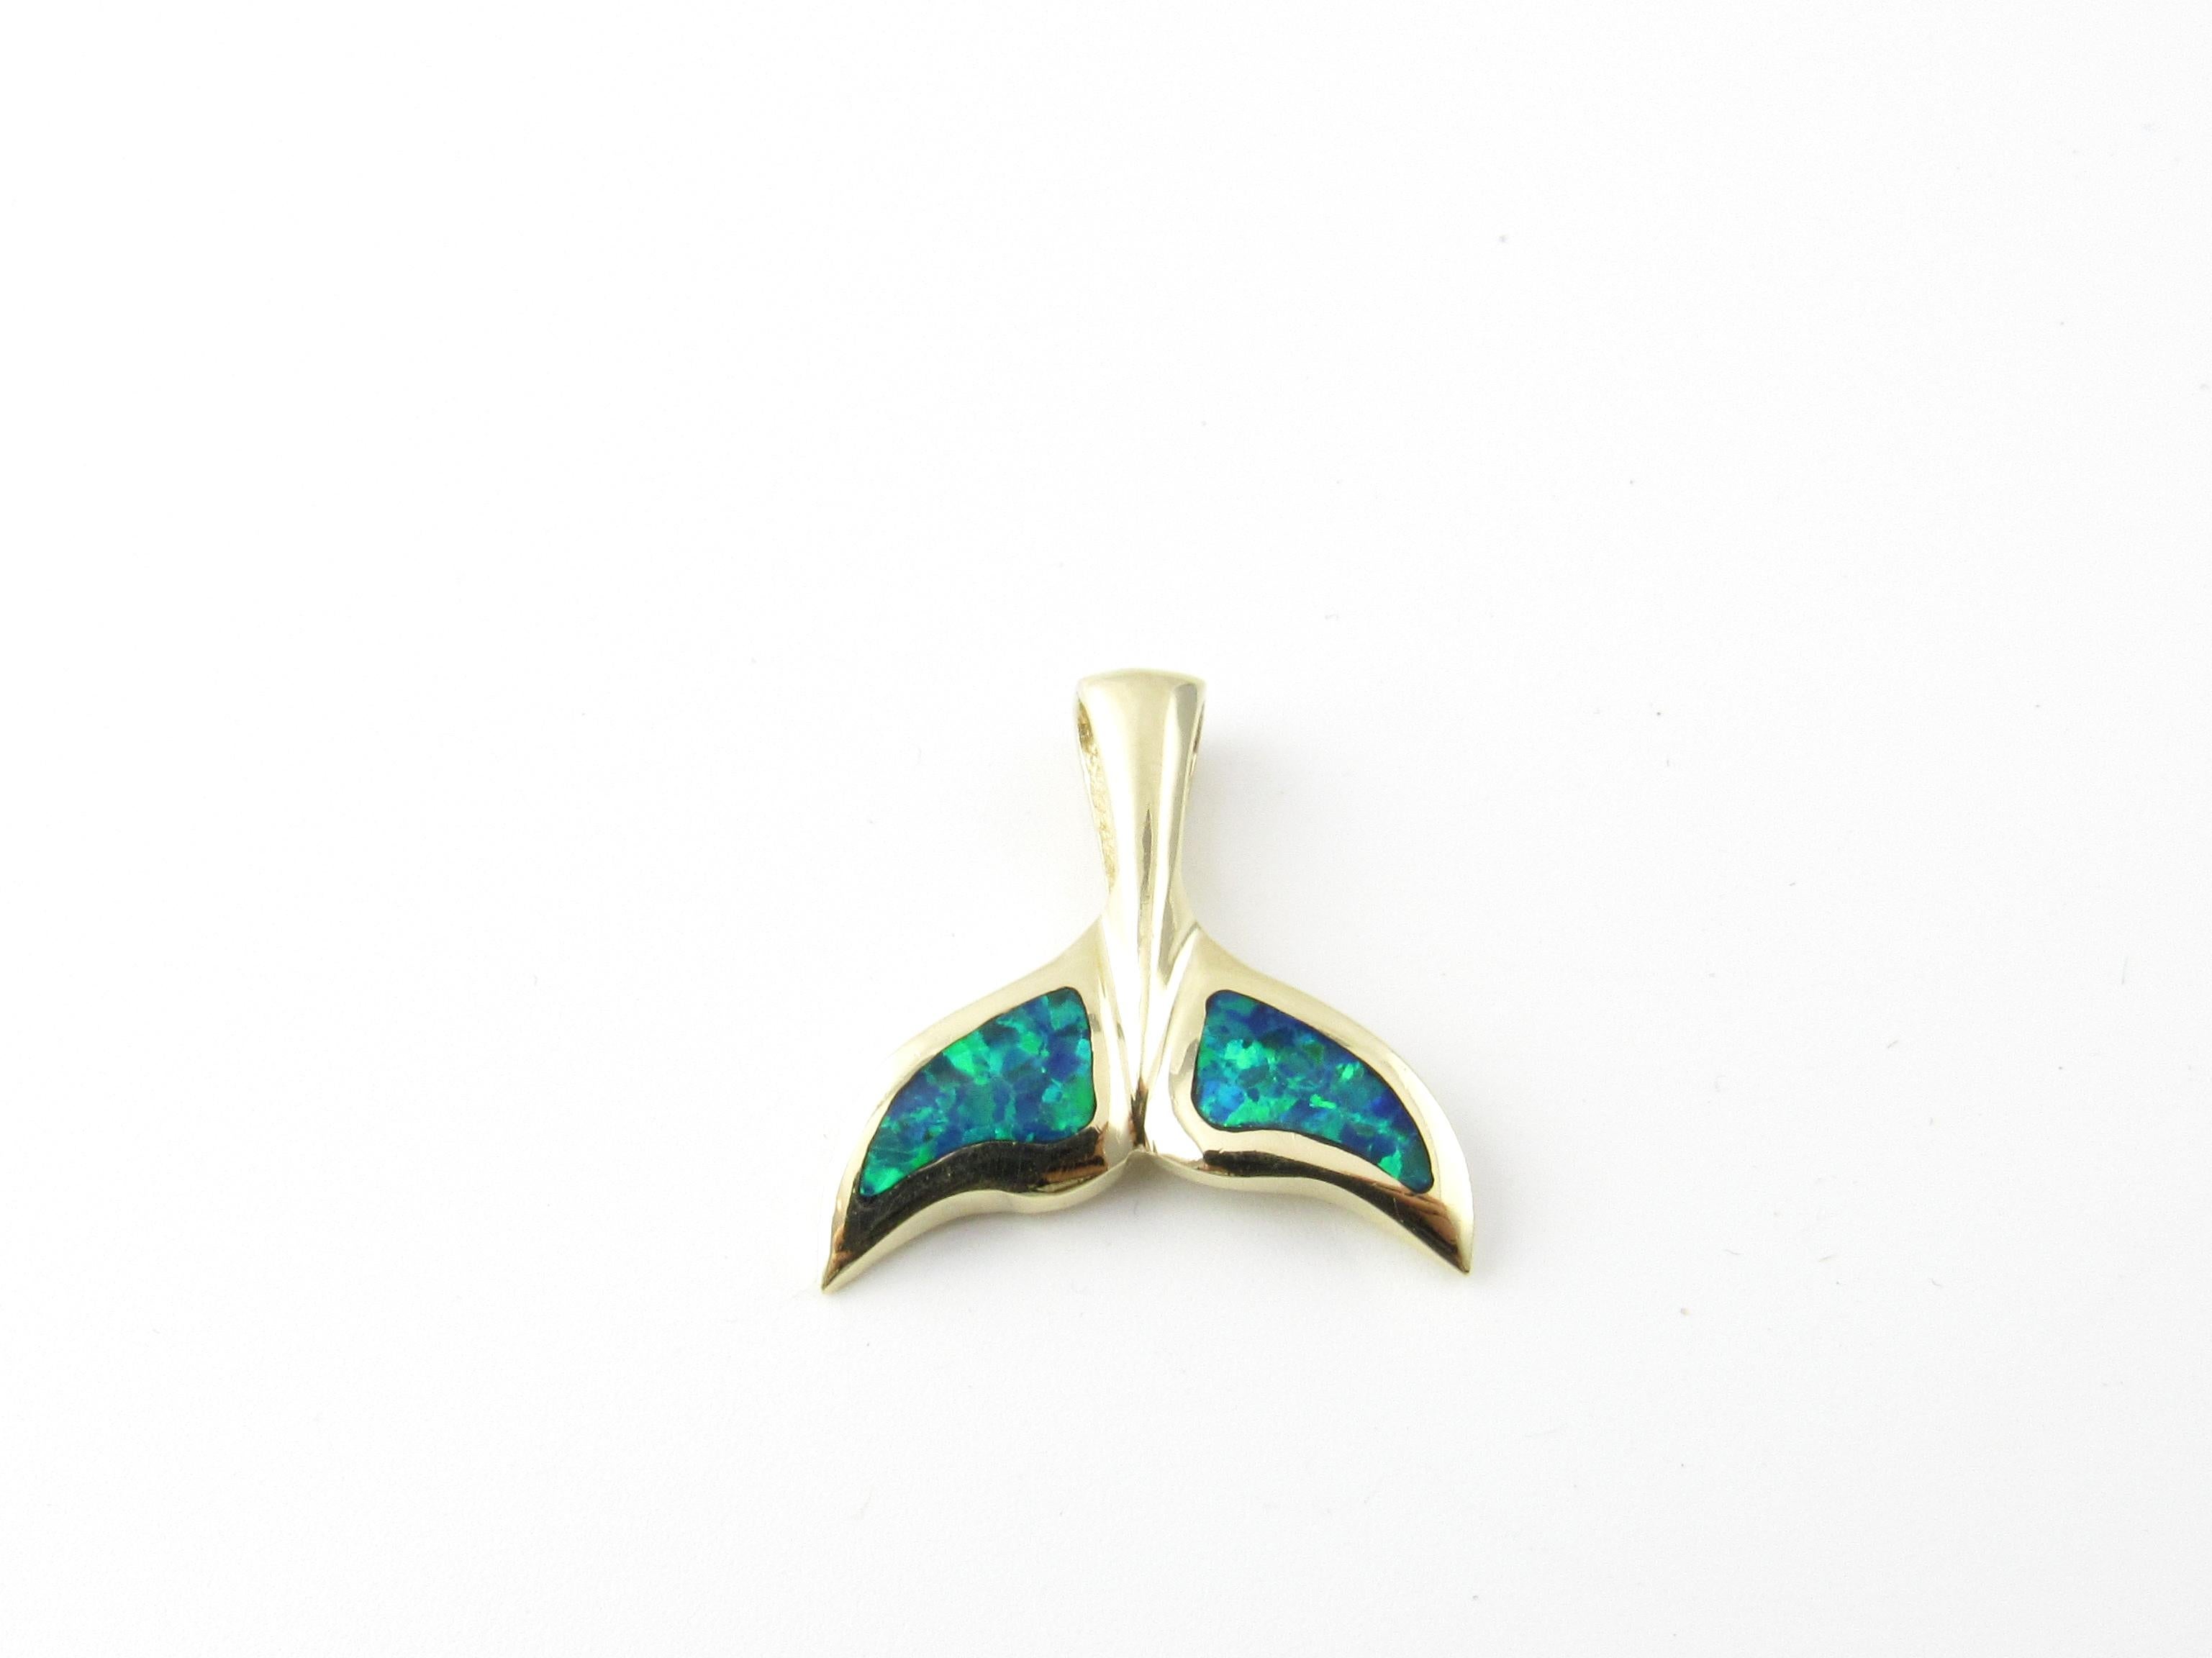 14 Karat Yellow Gold and Opal Whale Tale Pendant-

This stunning pendant features a beautiful whale tale decorated with lovely inlaid opal gemstones and set in 14K yellow gold.

Size:  24 mm x 23 mm  

Weight:  3.7 dwt. /  5.9 gr. 

Stamped: